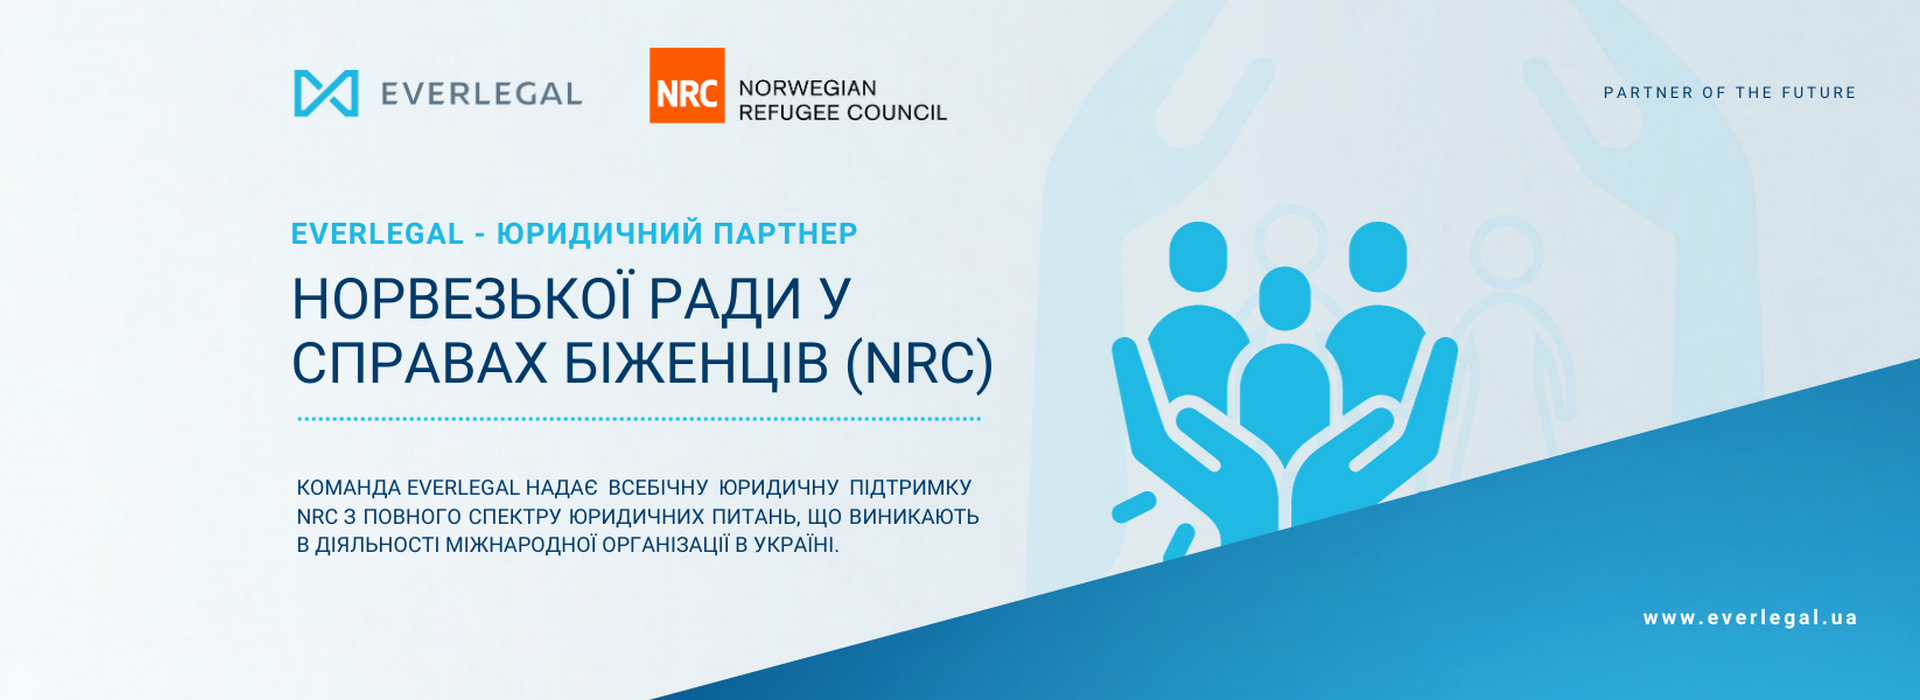 EVERLEGAL Is a Legal Partner of the Norwegian Refugee Council in Ukraine (NRC)